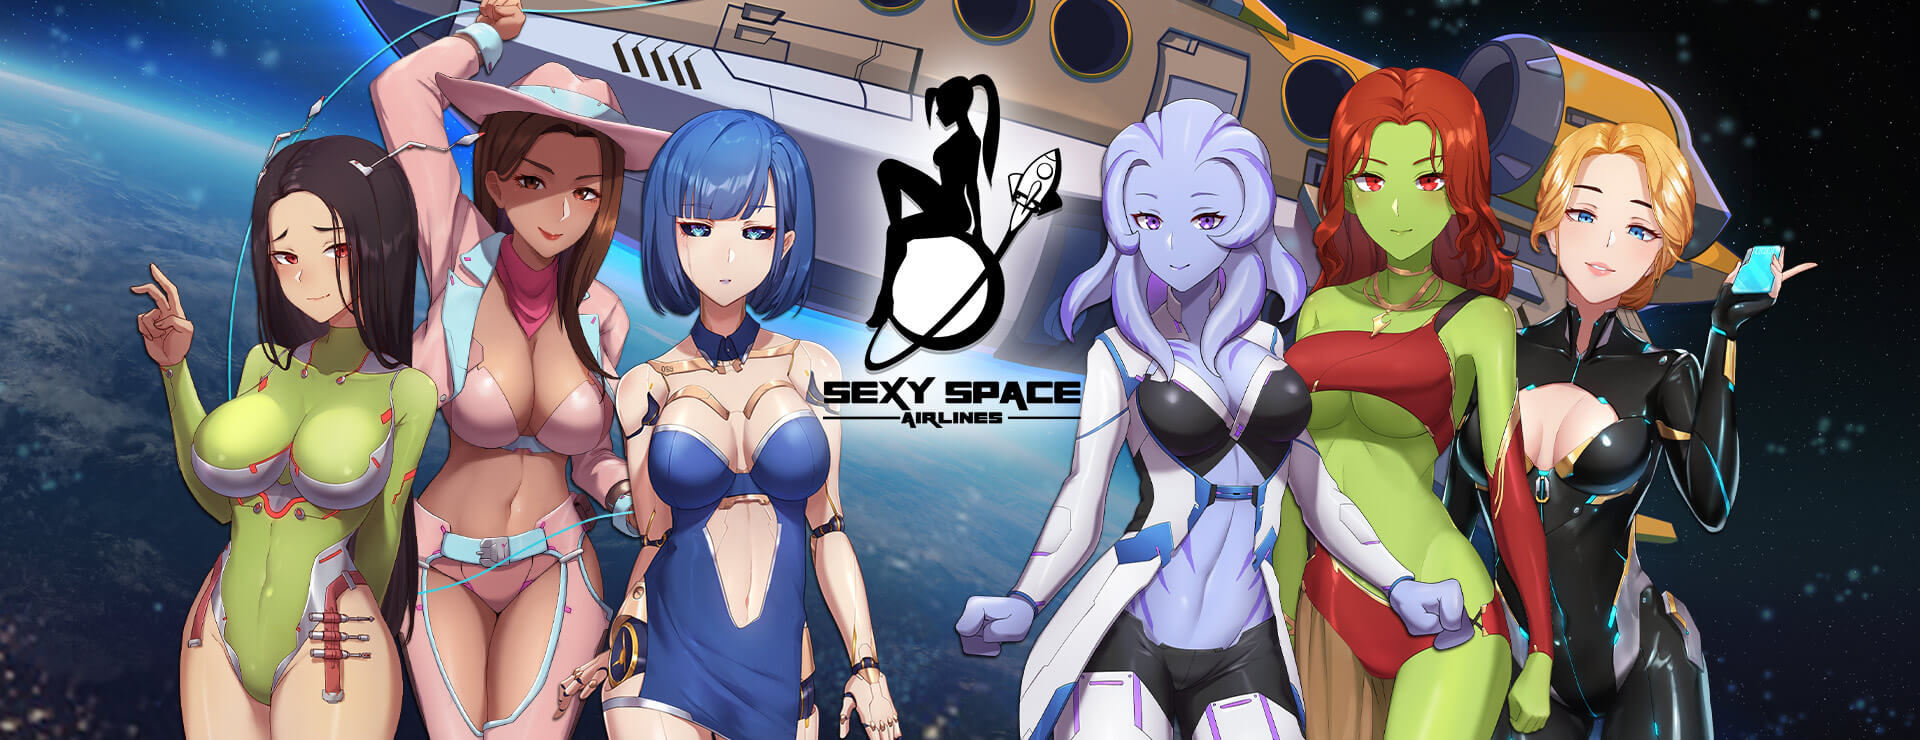 Sexy Space Airlines - カジュアル ゲーム